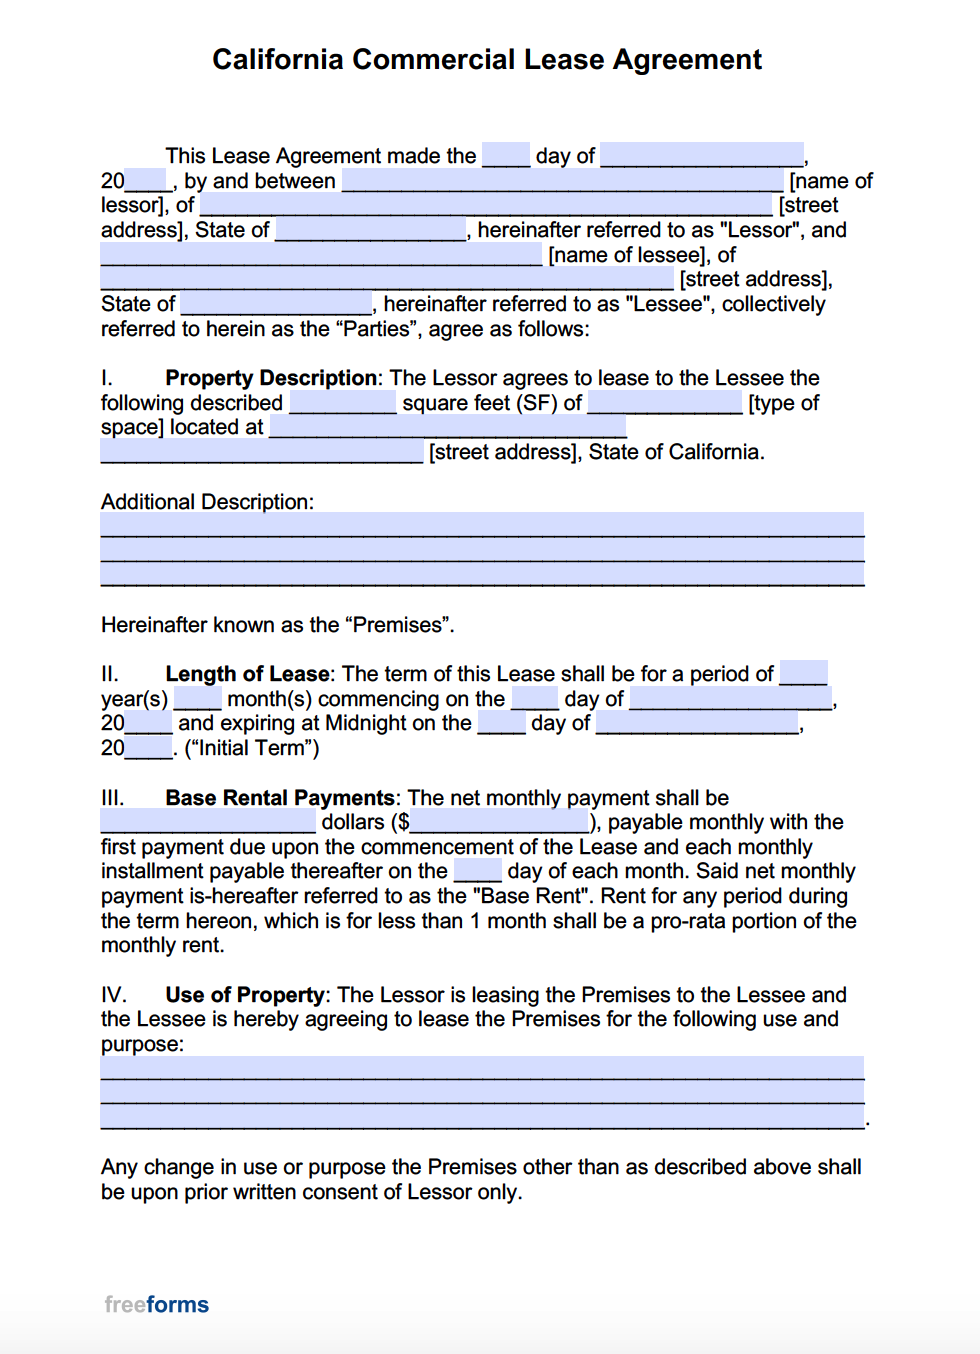 Free California Commercial Lease Agreement Template  PDF  WORD For building rental agreement template